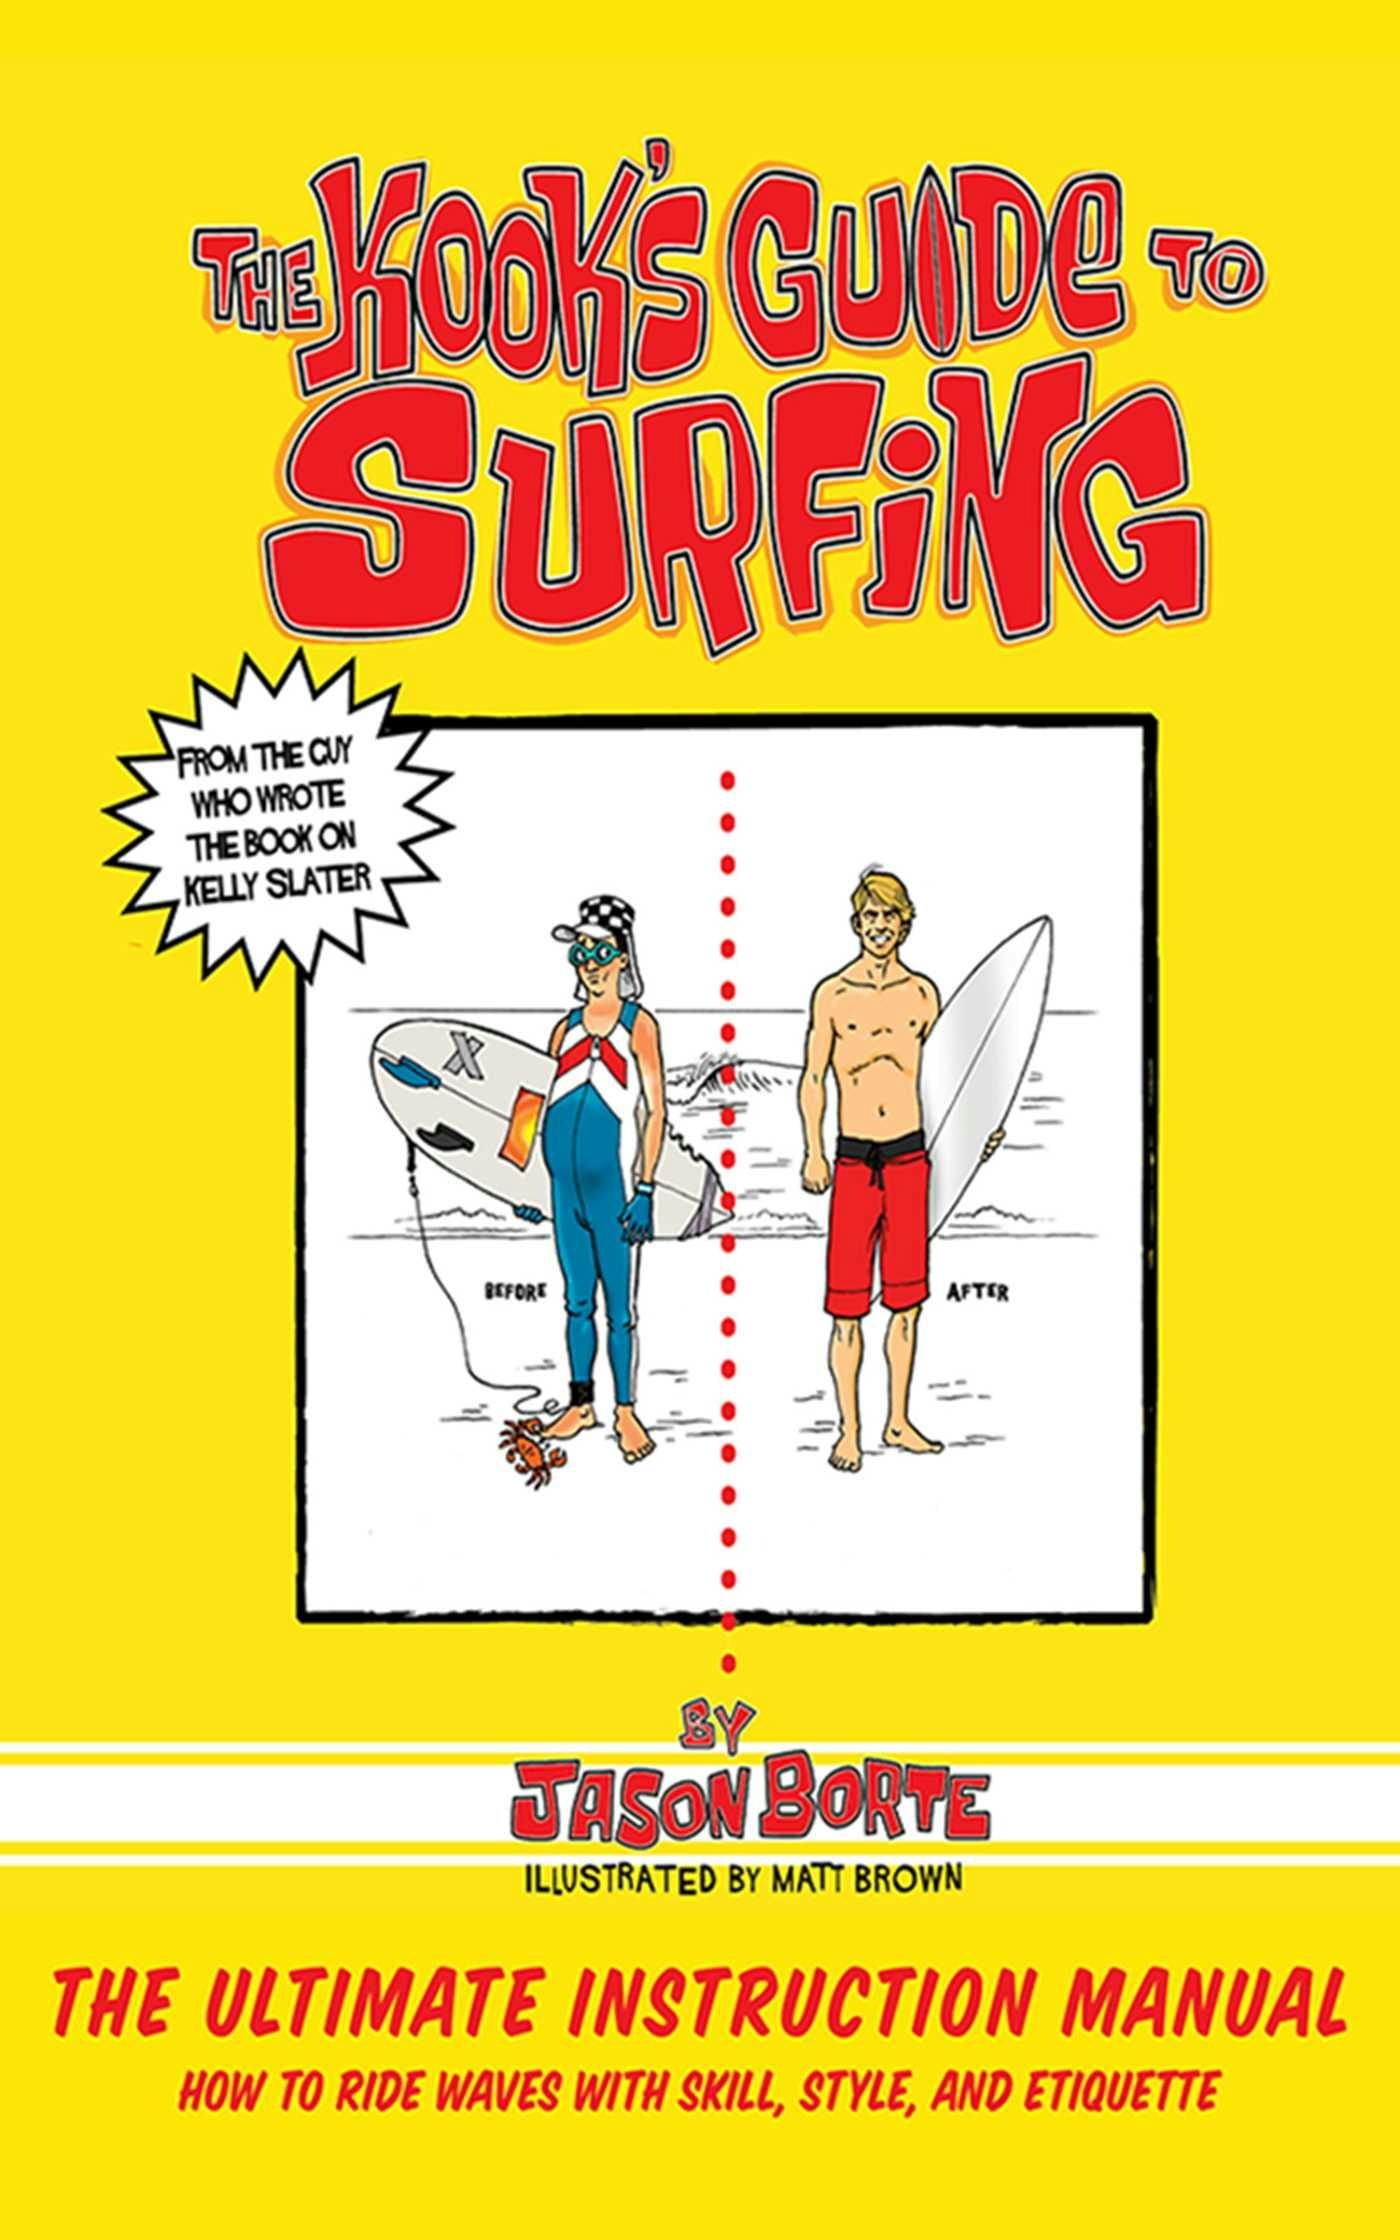 The Kook's Guide to Surfing: The Ultimate Instruction Manual: How to Ride Waves with Skill, Style, and Etiquette - Jason Borte